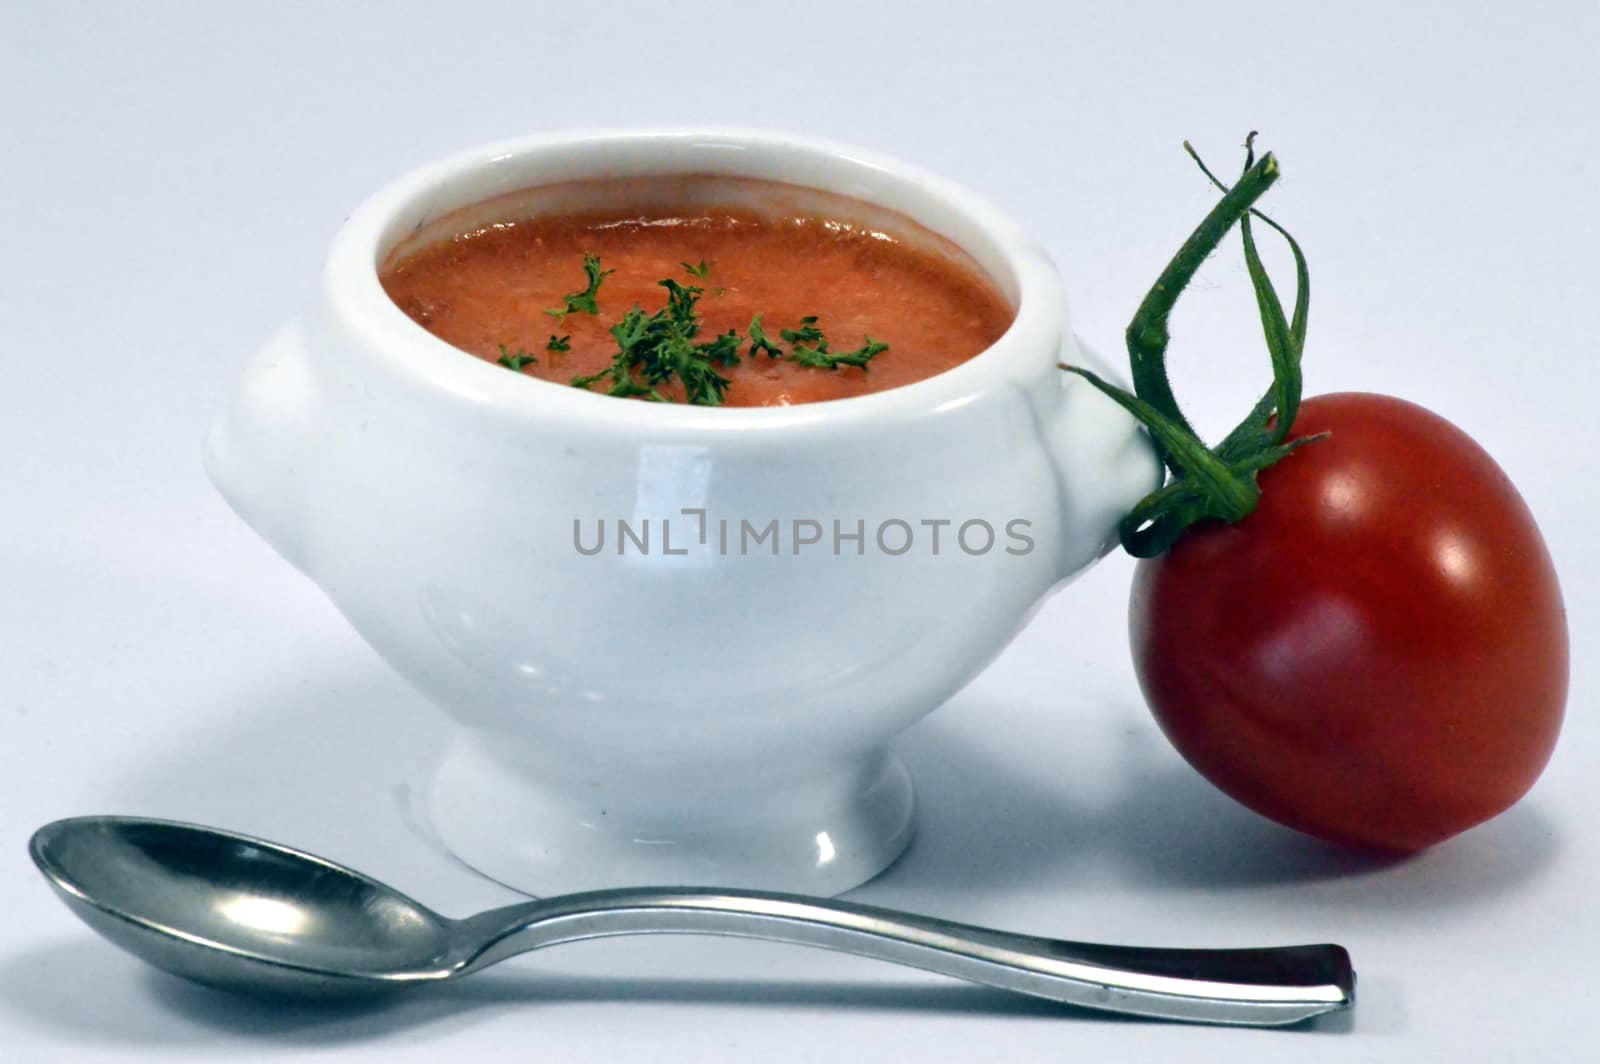 Cream of tomato soup in a white bowl. by Philou1000